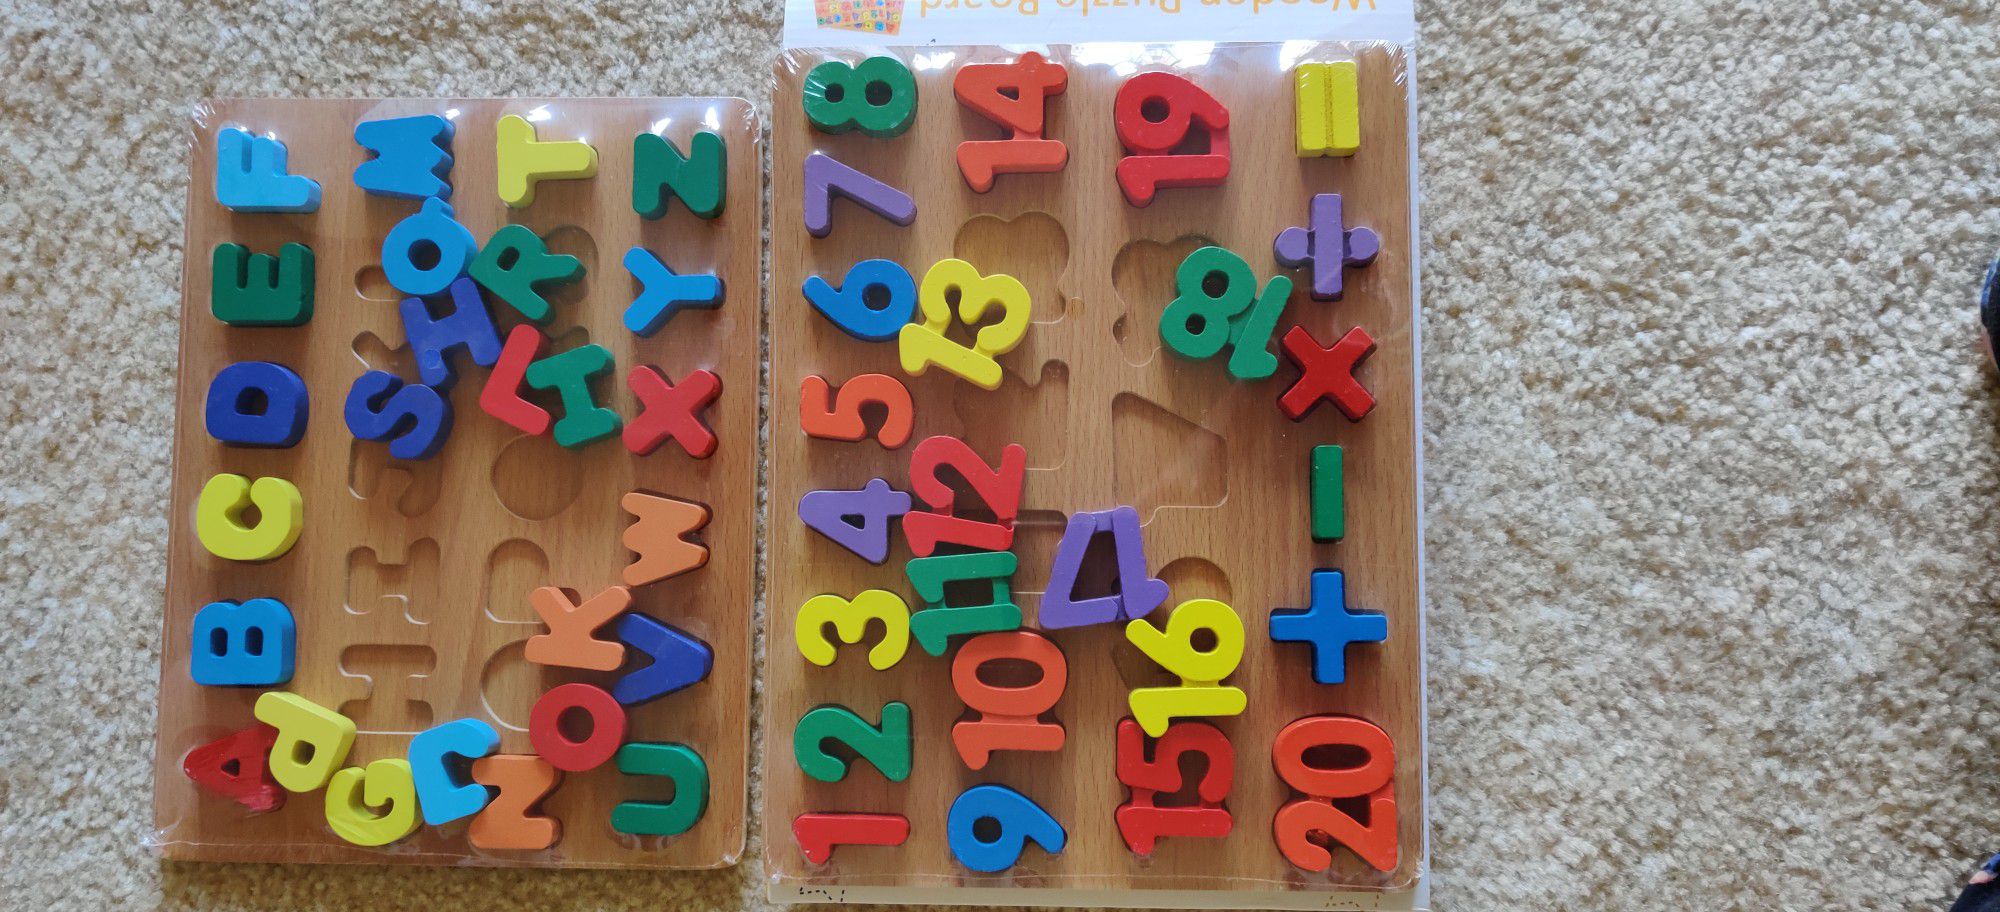 Wooden Puzzles for Toddlers, Wooden Alphabet Number Puzzles for Kids Ages 2 3 4 5, Toddler Learning Puzzle Toys Set